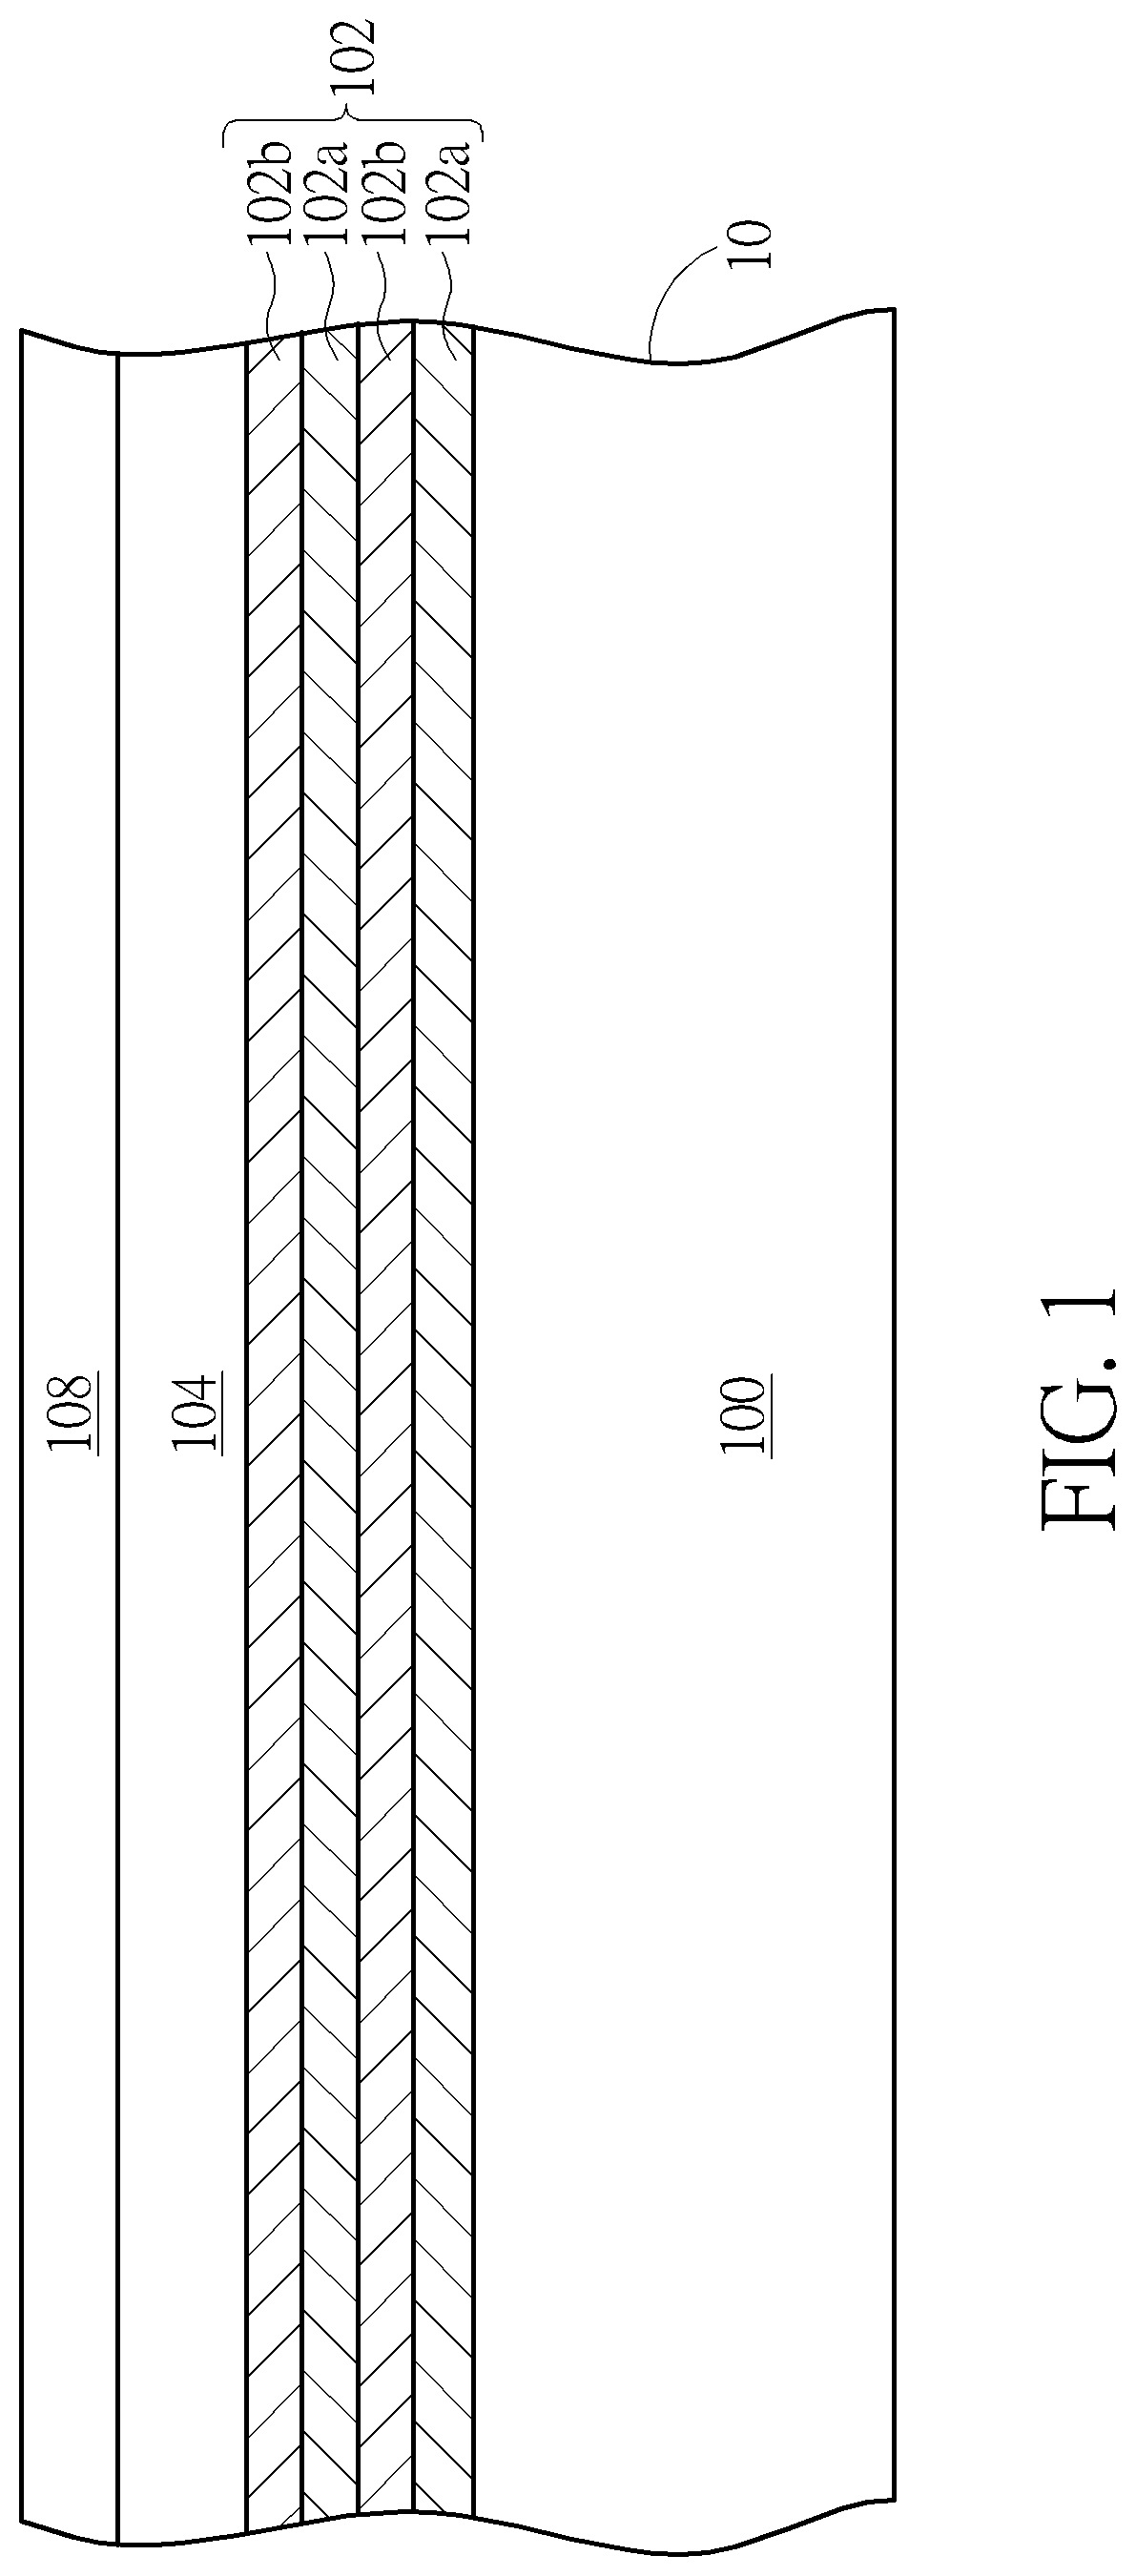 Semiconductor memory device with buried capacitor and fin-like electrodes, and fabrication method thereof